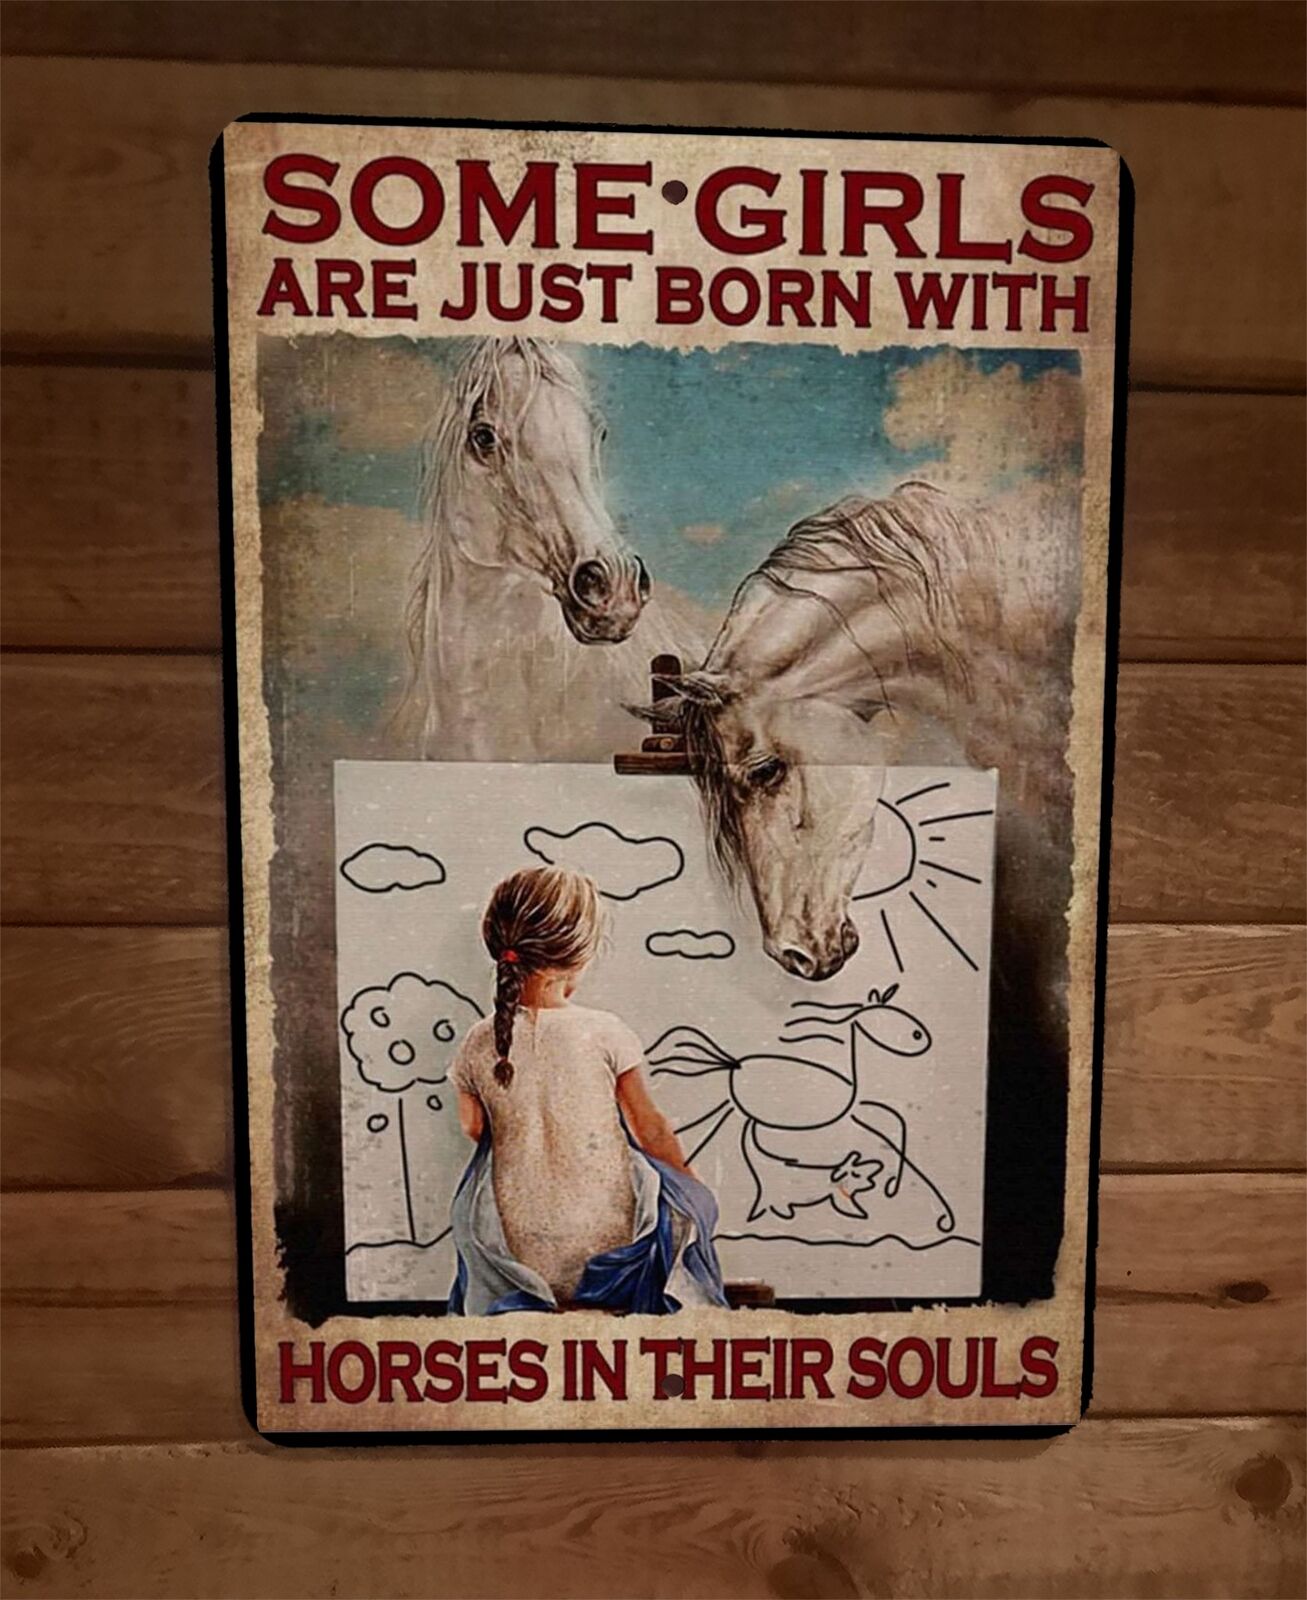 Some Girls Just Born With Horses in Their Souls 8x12 Metal Wall Animal Poster